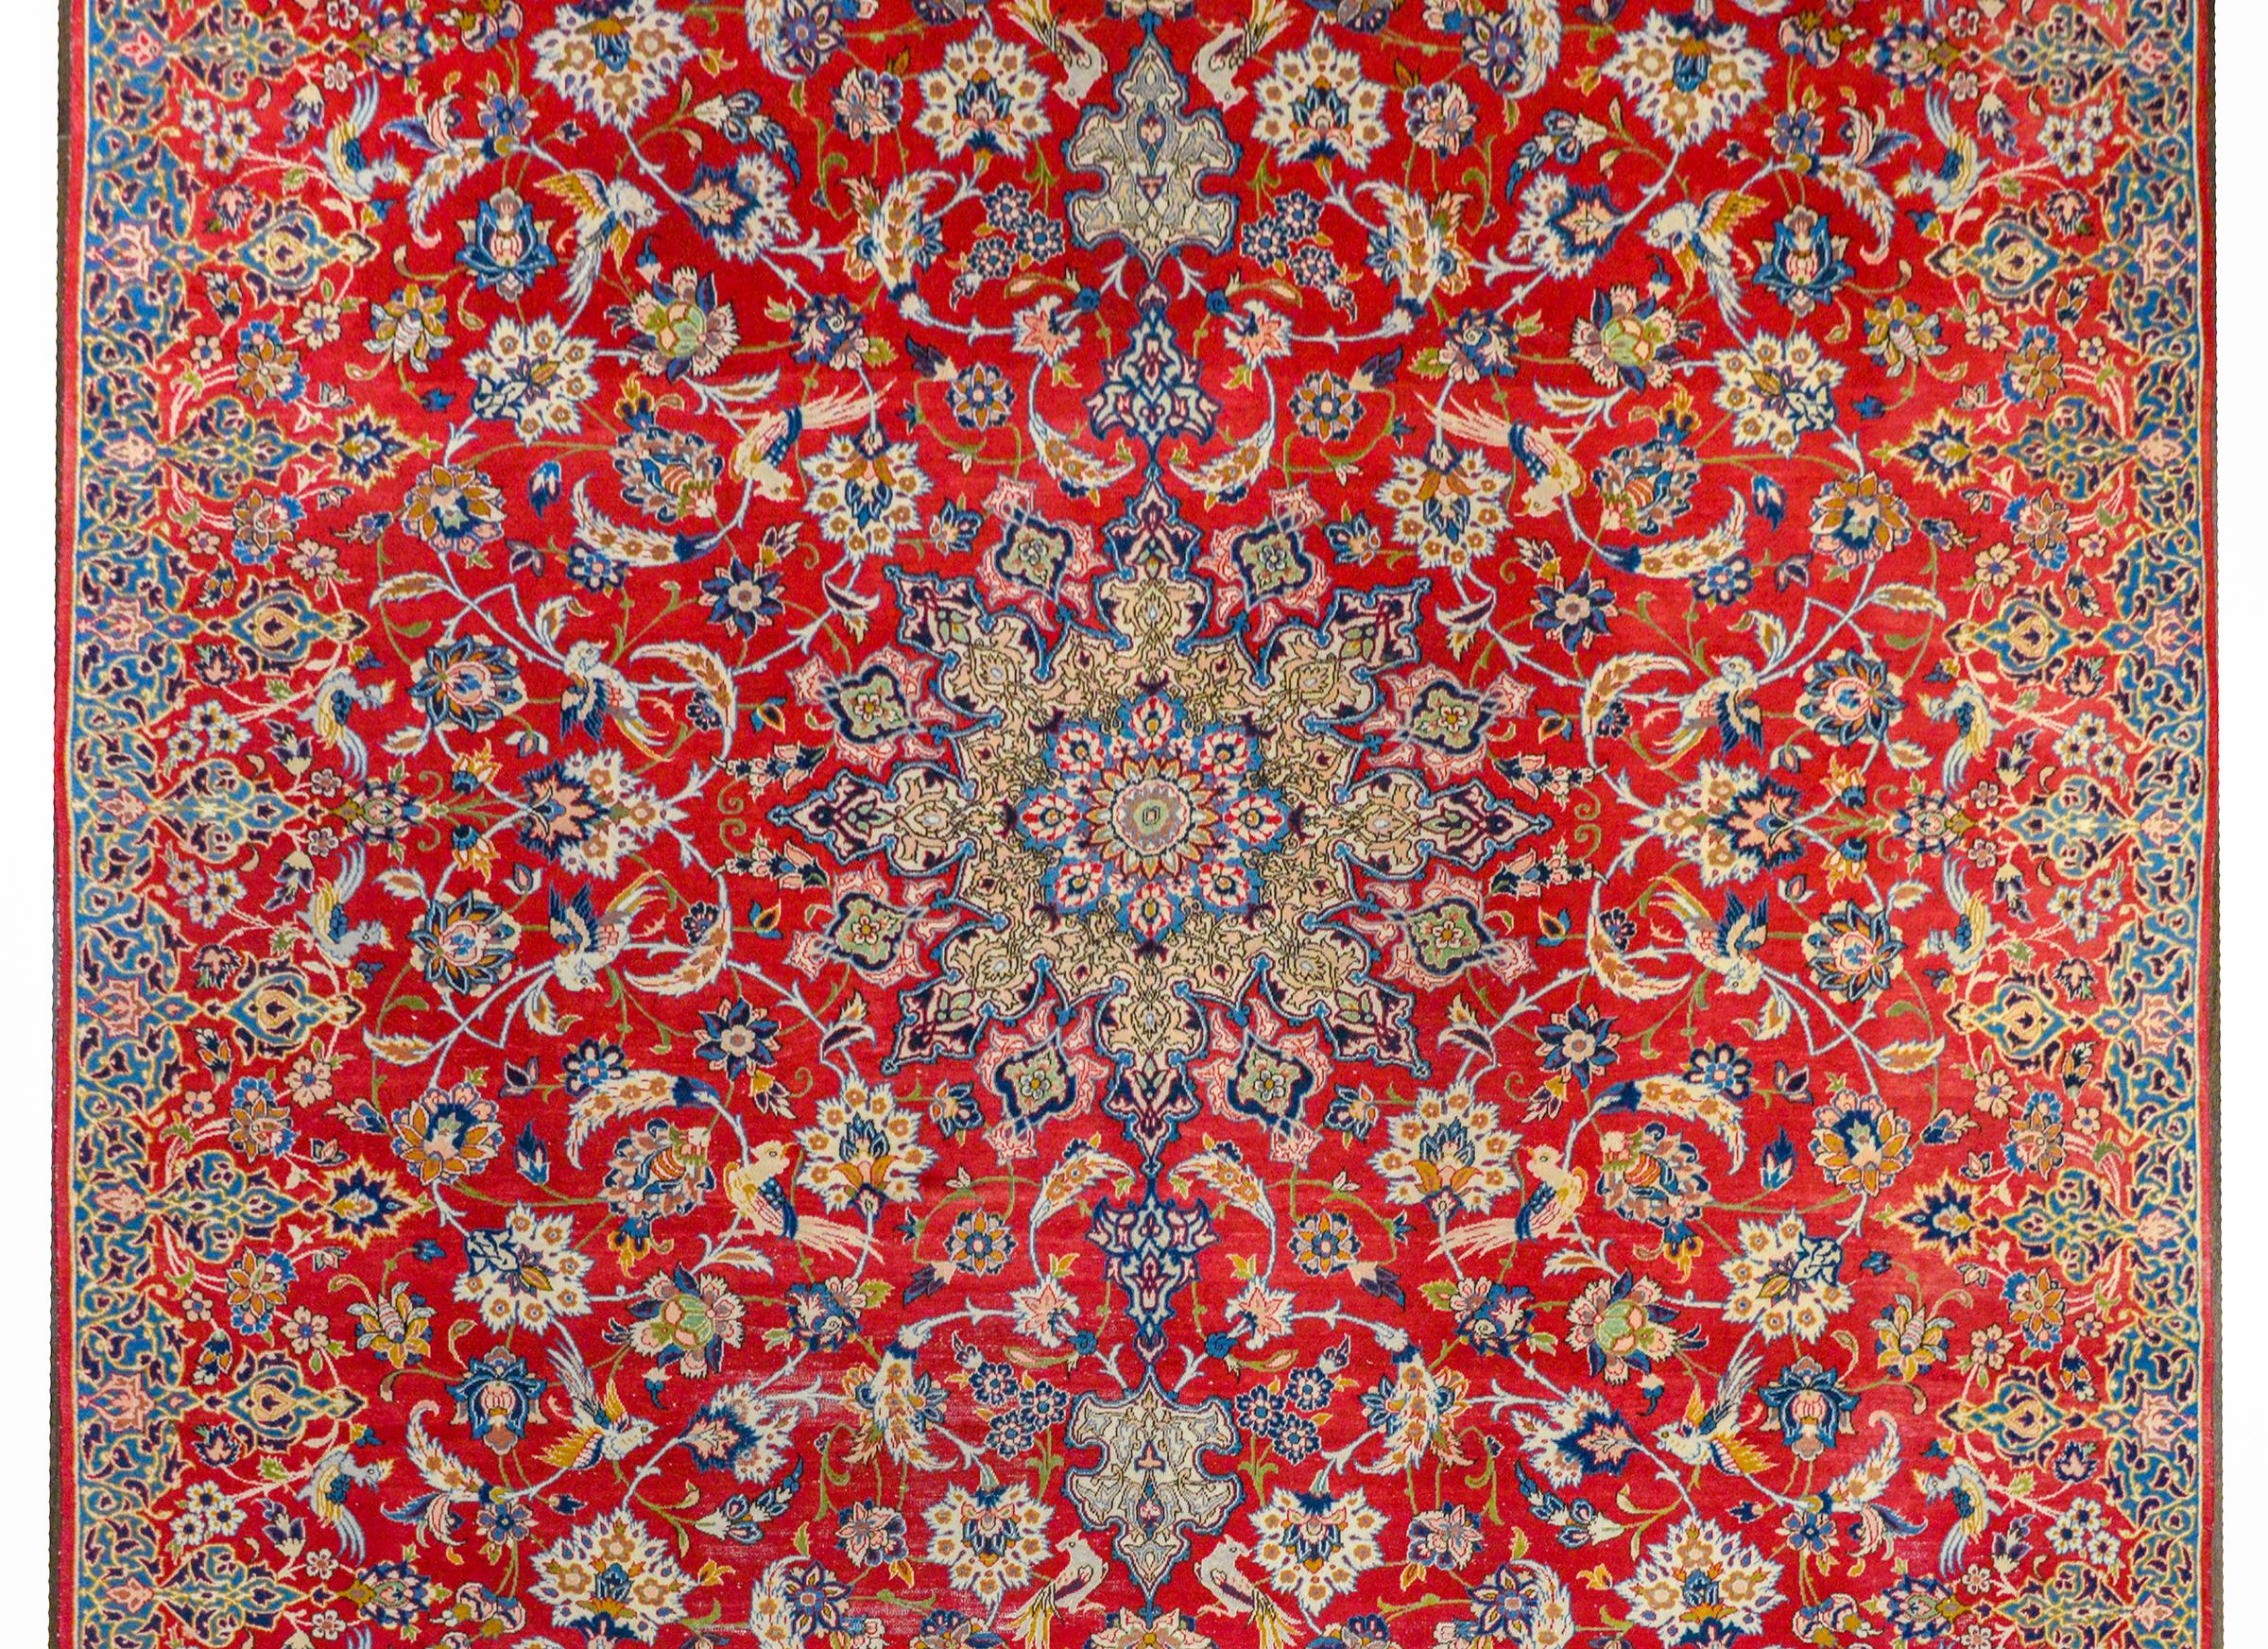 An extraordinary mid-20th century Persian Isfahan rug with an outstanding large-scale medallion amidst a field on of scrolling vines and flowers woven in myriad colors on a brilliant crimson background. The scrolling vines of the field morph into